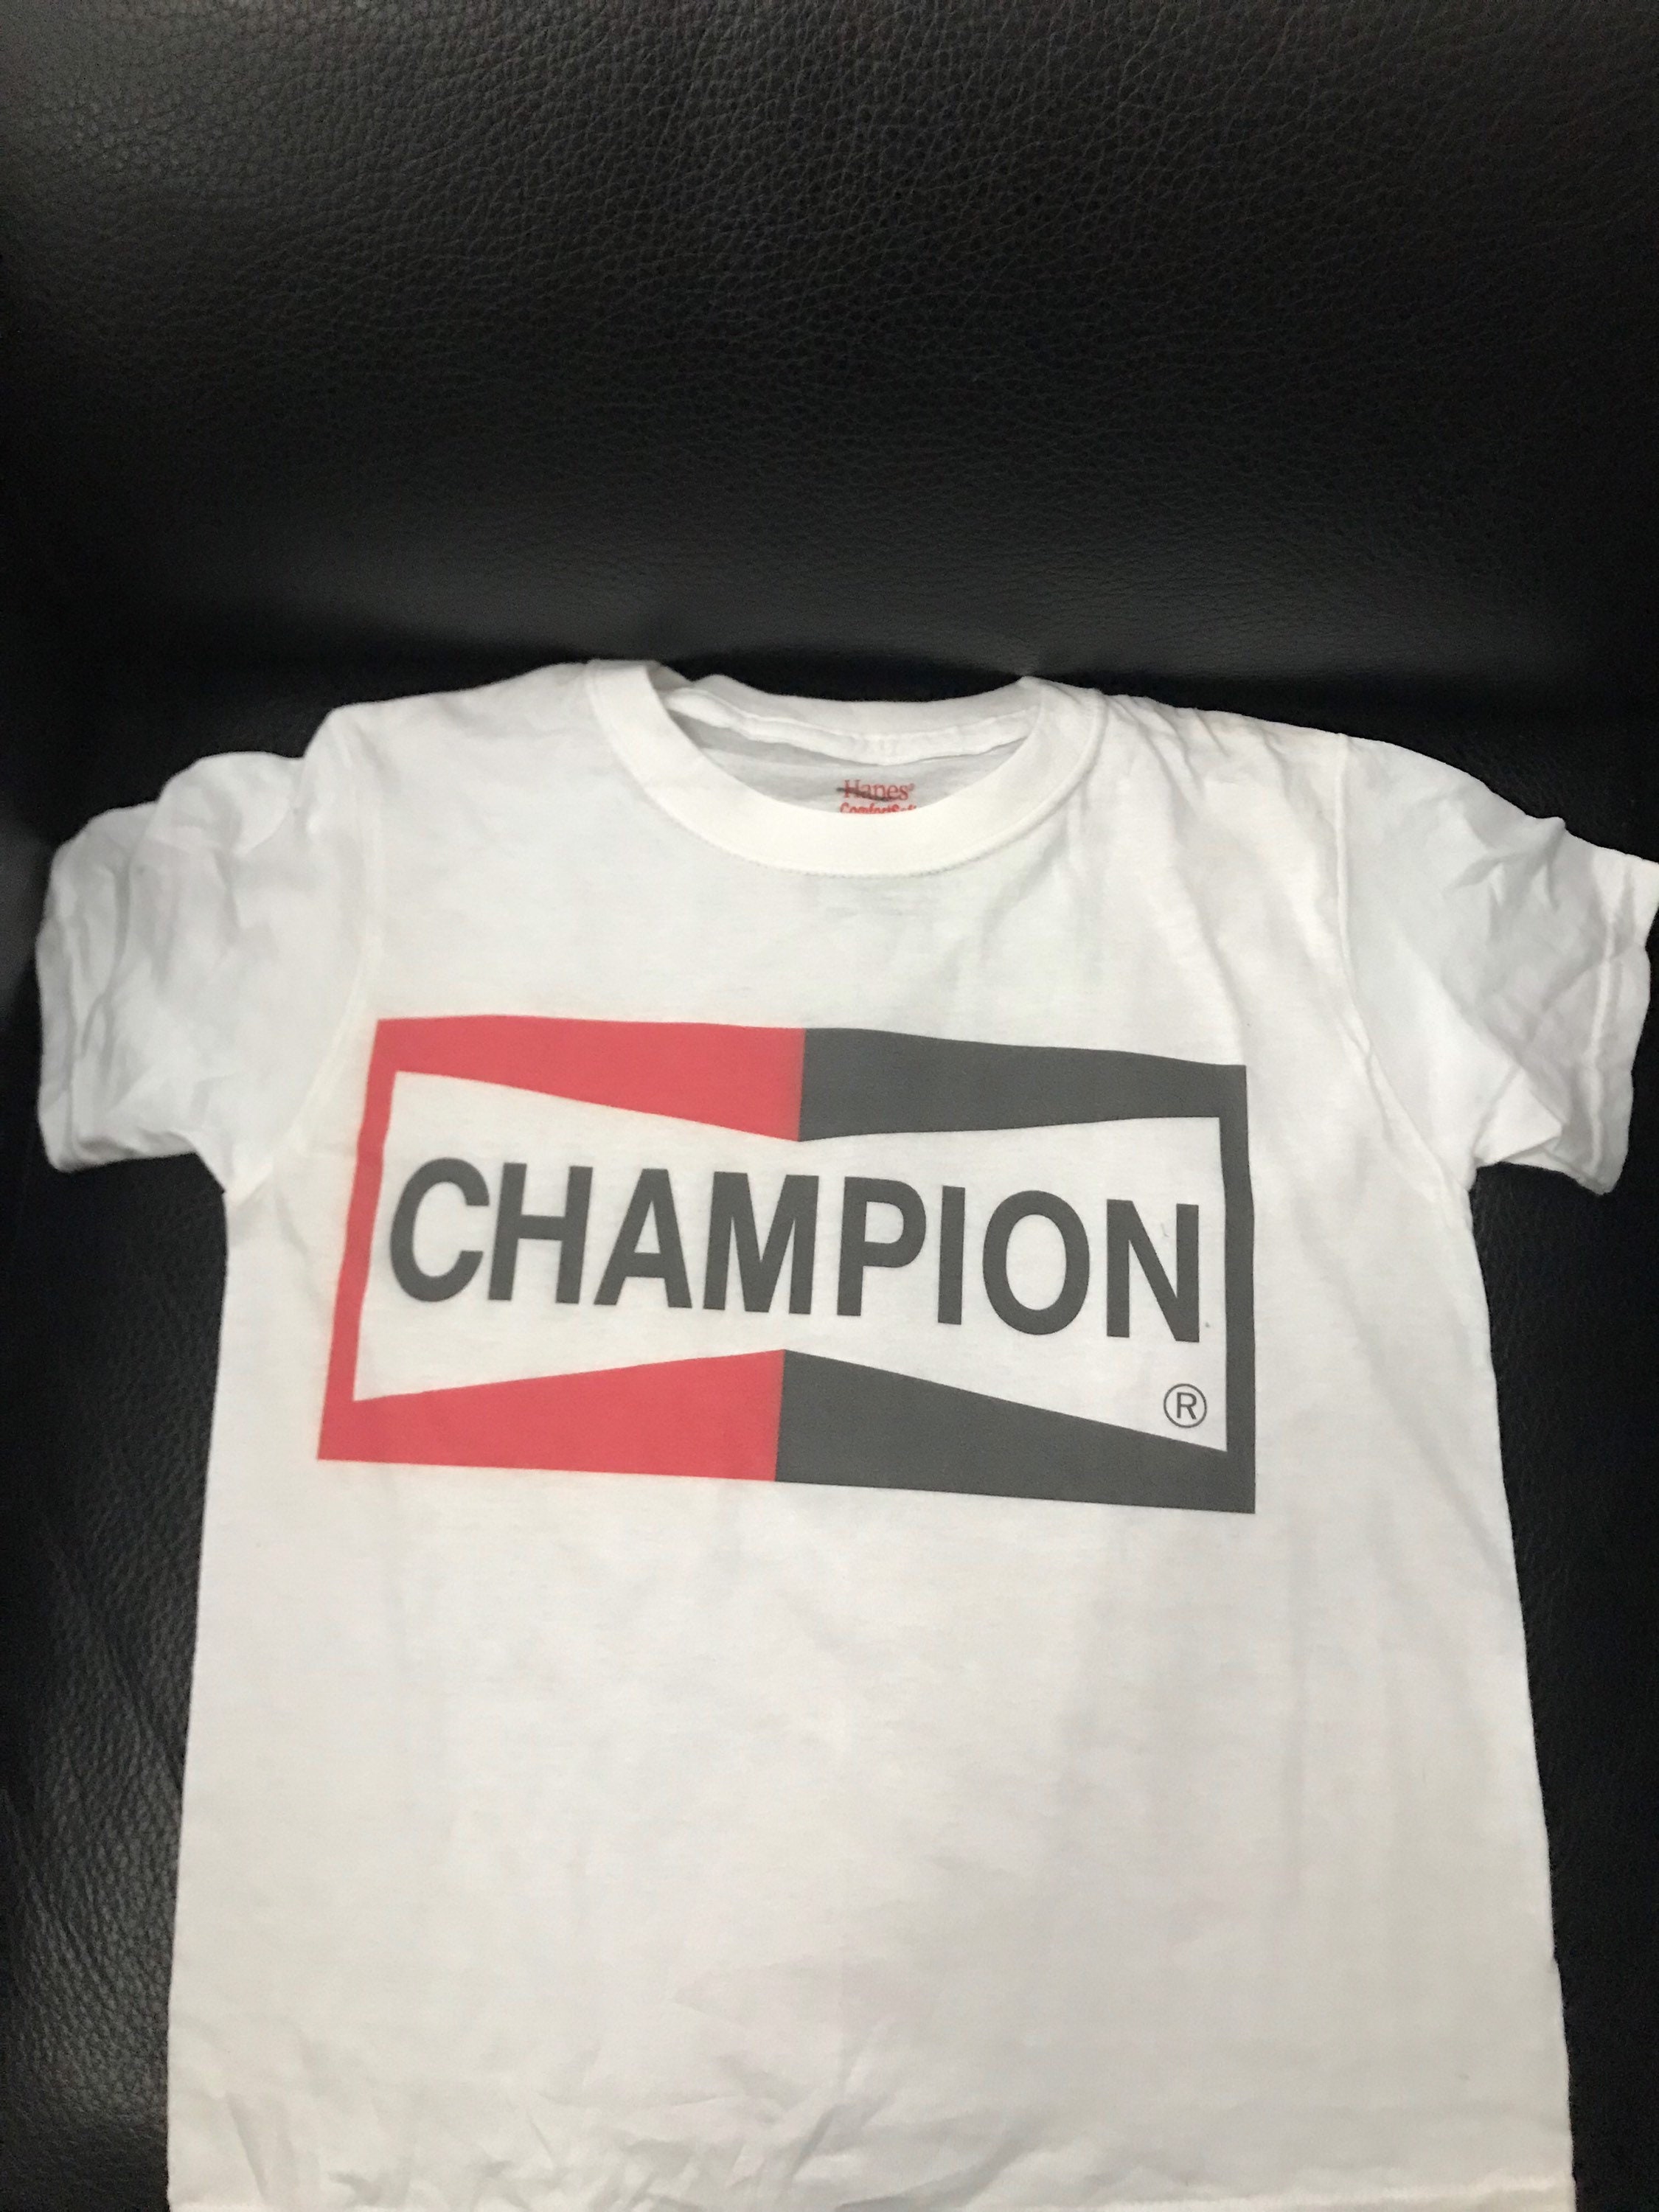 Champion T Racing Spark - Etsy